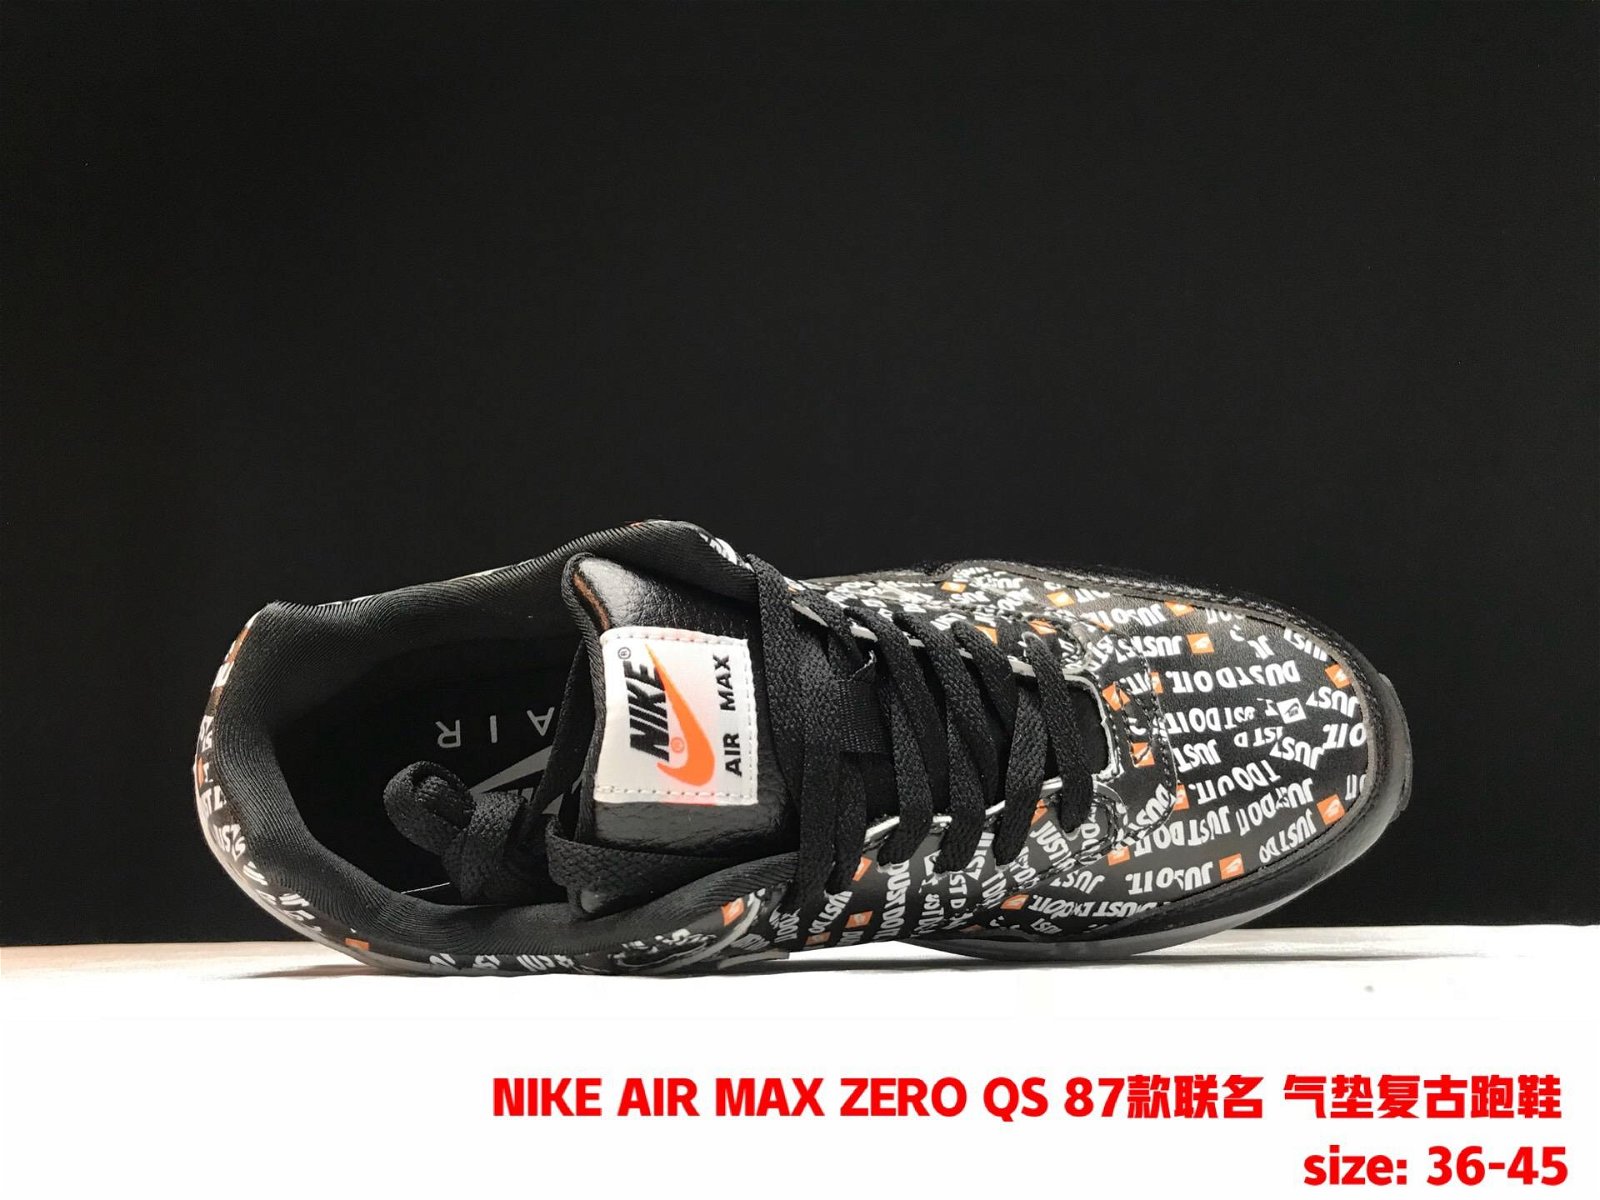 New AIR MAX ZERO QS 87 AIR max co-branded stylish retro running shoes - Air  Max (China Trading Company) - Athletic & Sports Shoes - Shoes